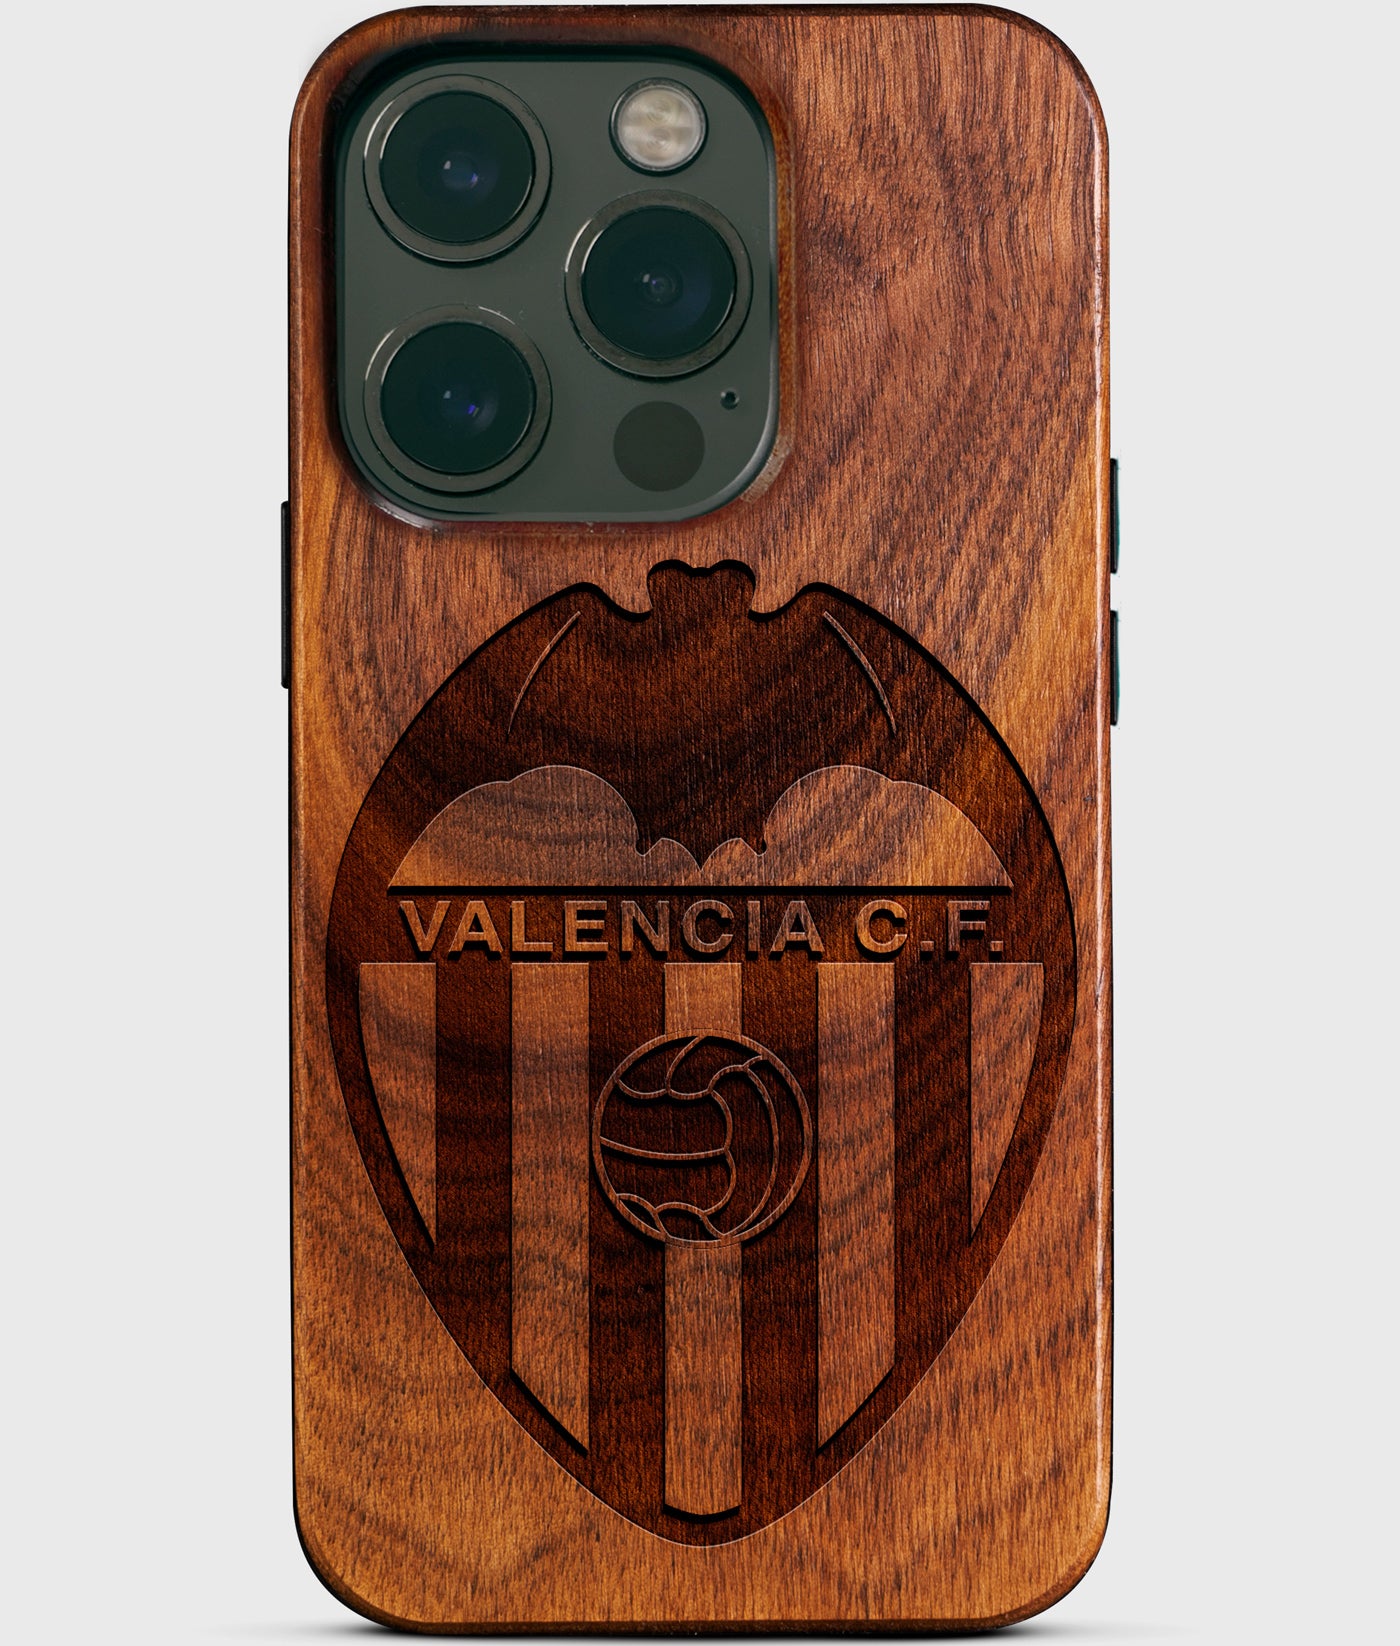 Custom Valencia CF iPhone 14 Pro Cases - Valencia CF Personalized iPhone 14 Pro Cover - Valencia Spain Football Club Valencia CF Birthday Gifts For Men 2022 Best Valencia CF Christmas Gifts Wood unique Valencia CF Gift For Him Monogrammed